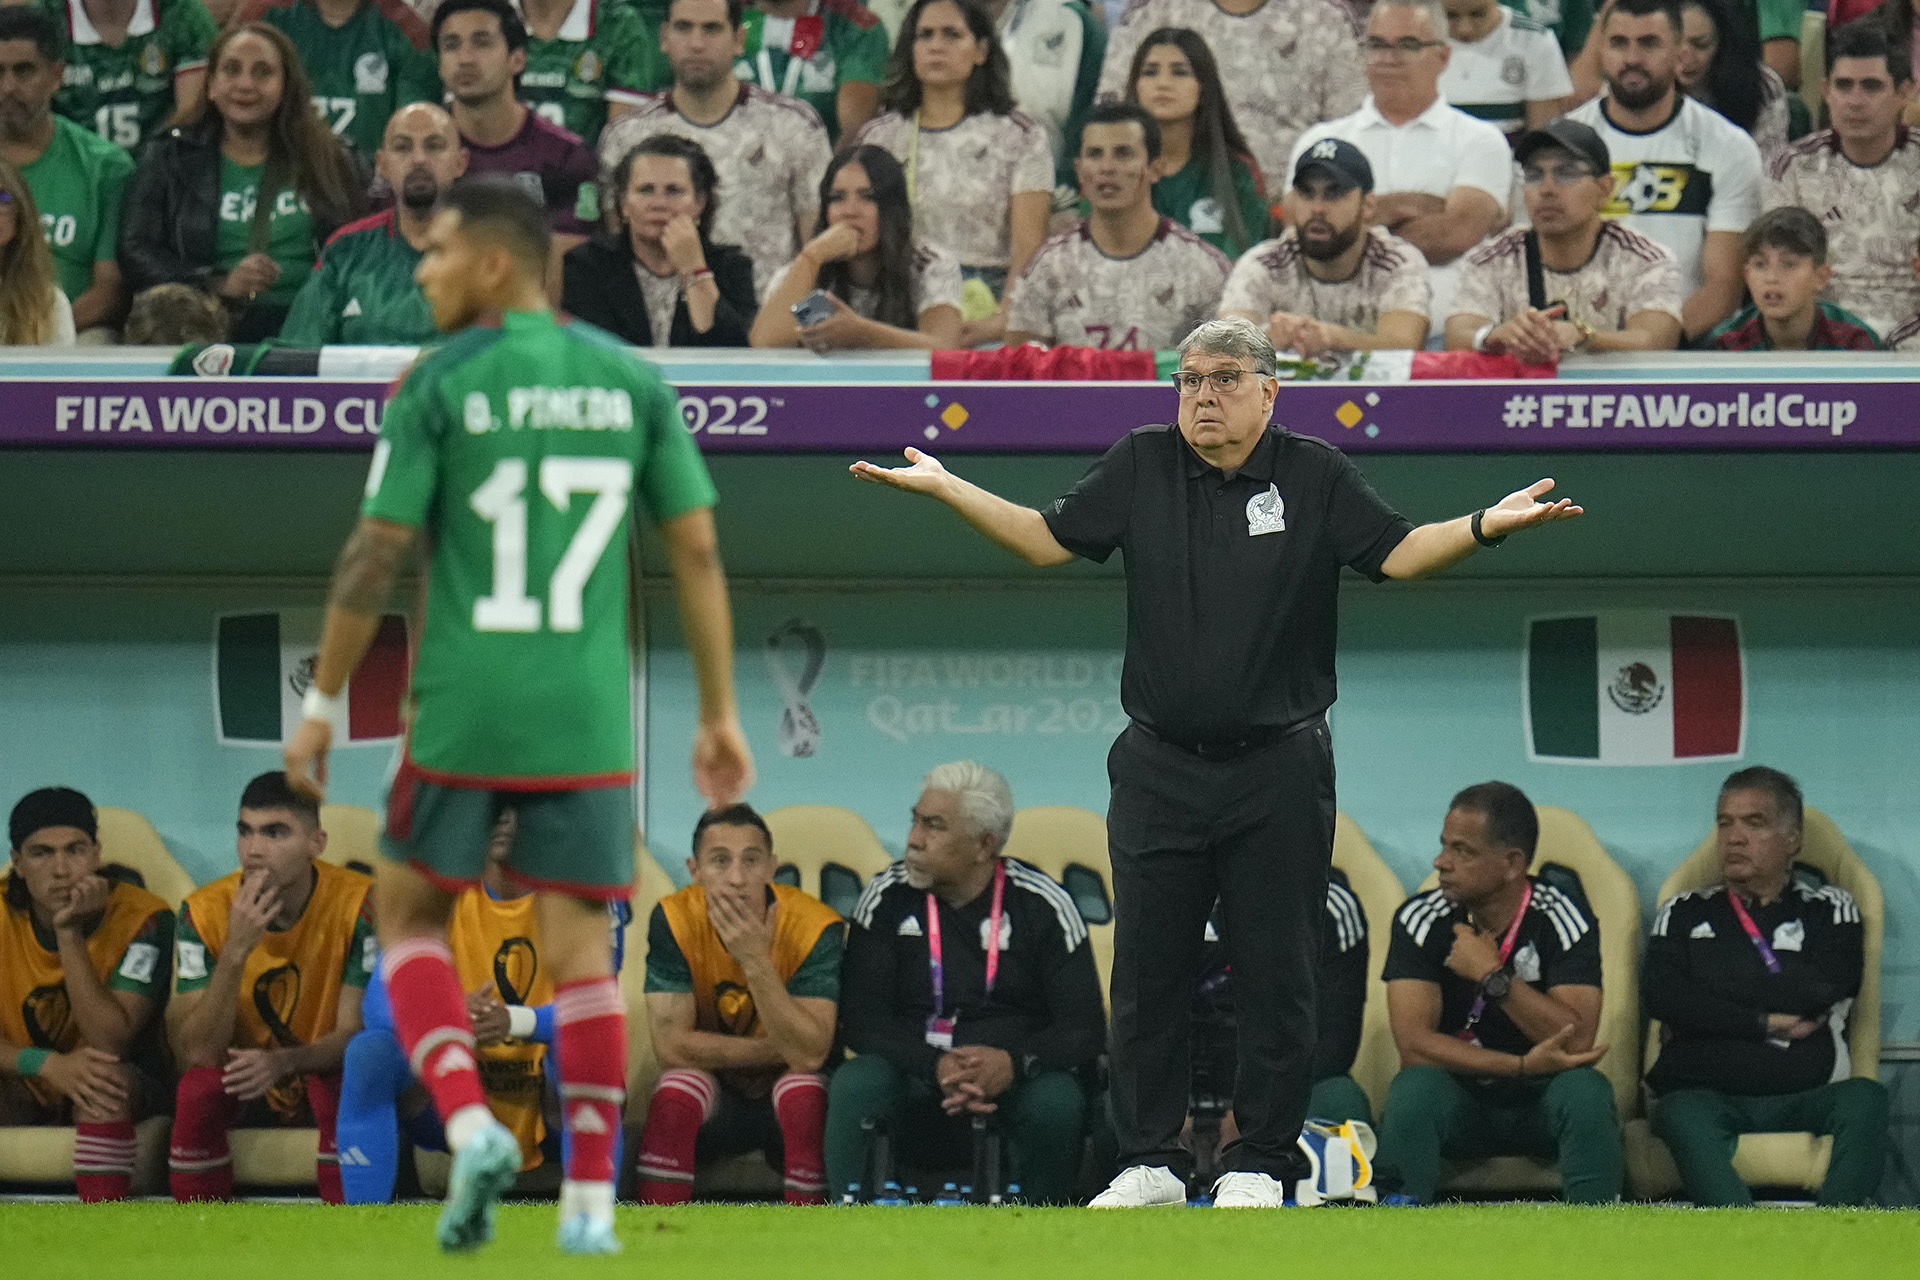 Mexico's head coach Gerardo Martino, right, signals to a player during the World Cup group C soccer match between Saudi Arabia and Mexico, at the Lusail Stadium in Lusail, Qatar, Wednesday, Nov. 30, 2022. (AP Photo/Julio Cortez)